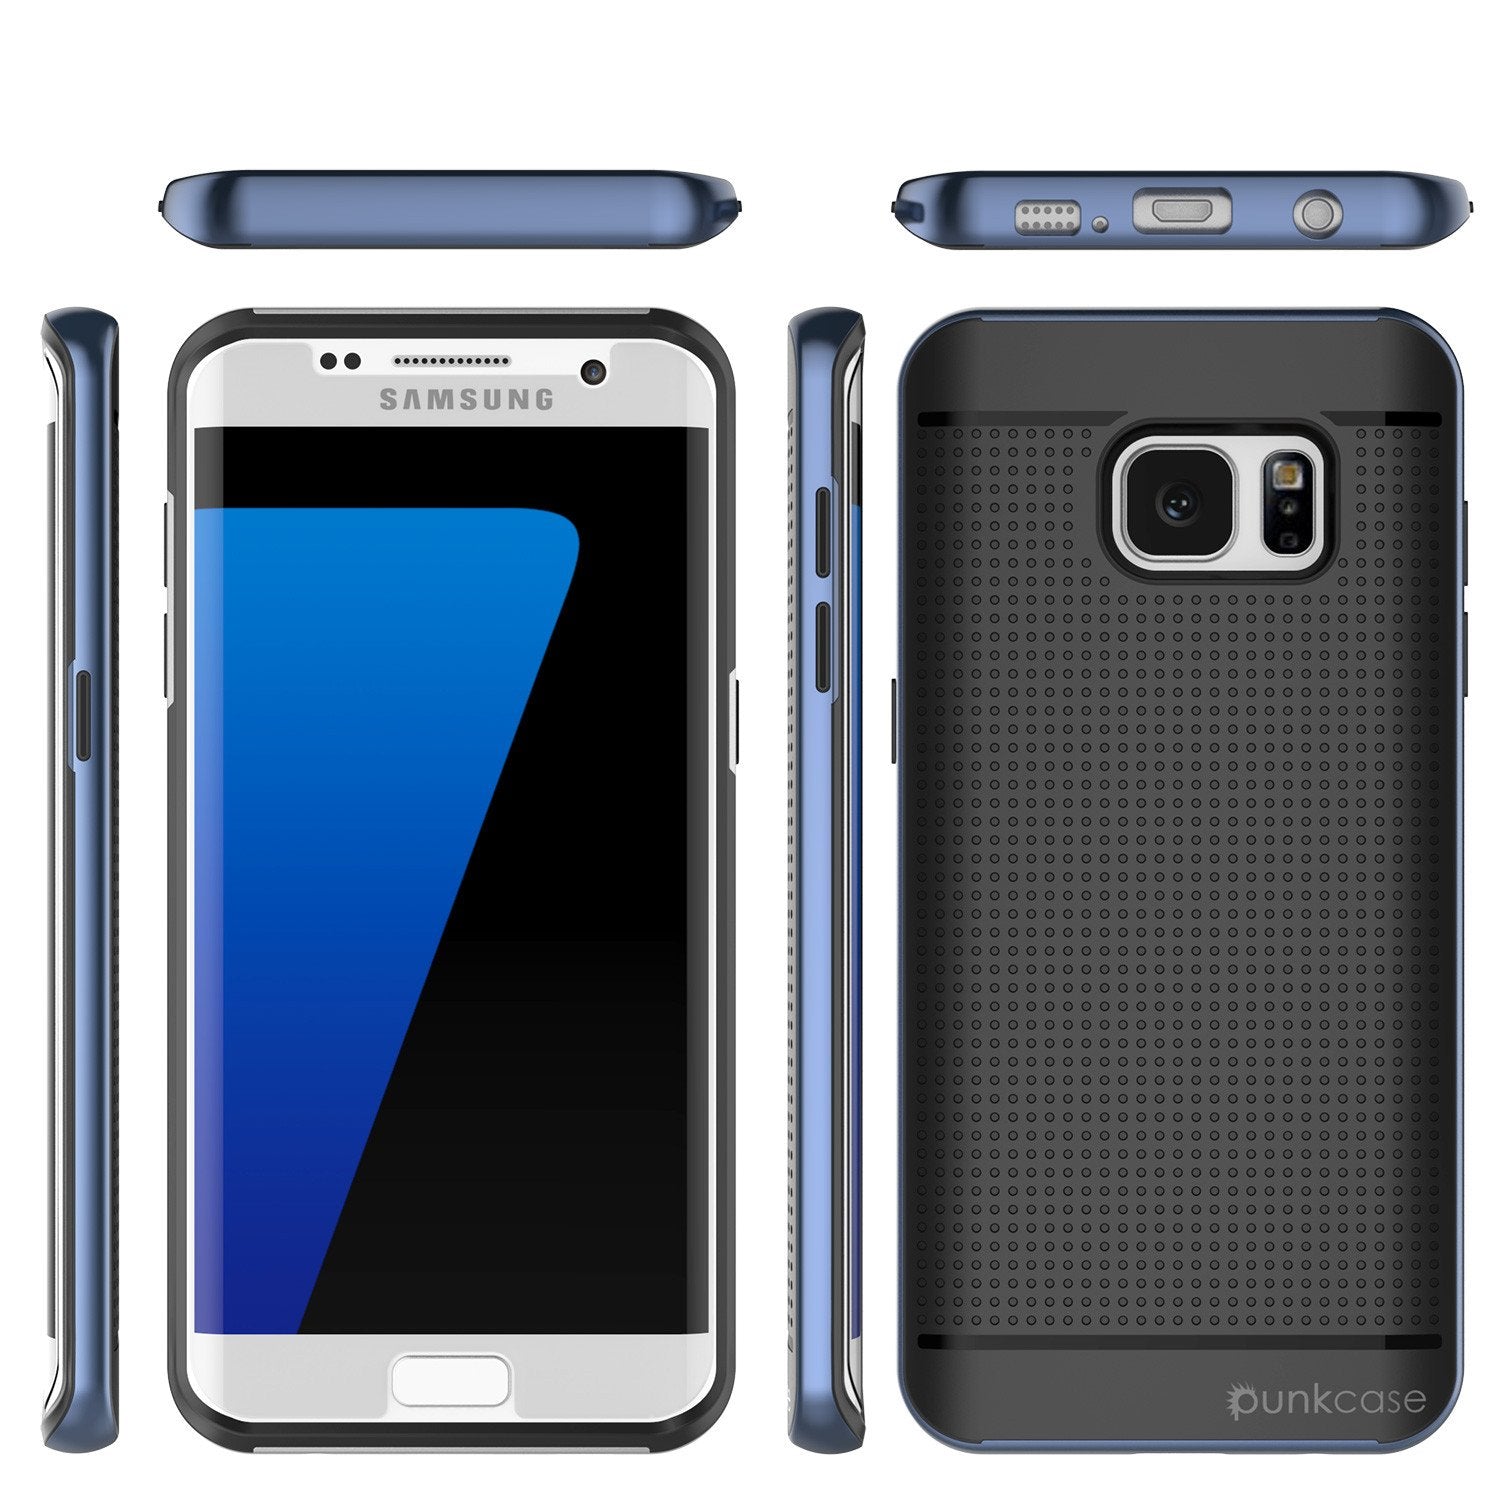 Galaxy S7 Edge Case, PunkCase STEALTH Navy Blue Series Hybrid 3-Piece Shockproof Dual Layer Cover